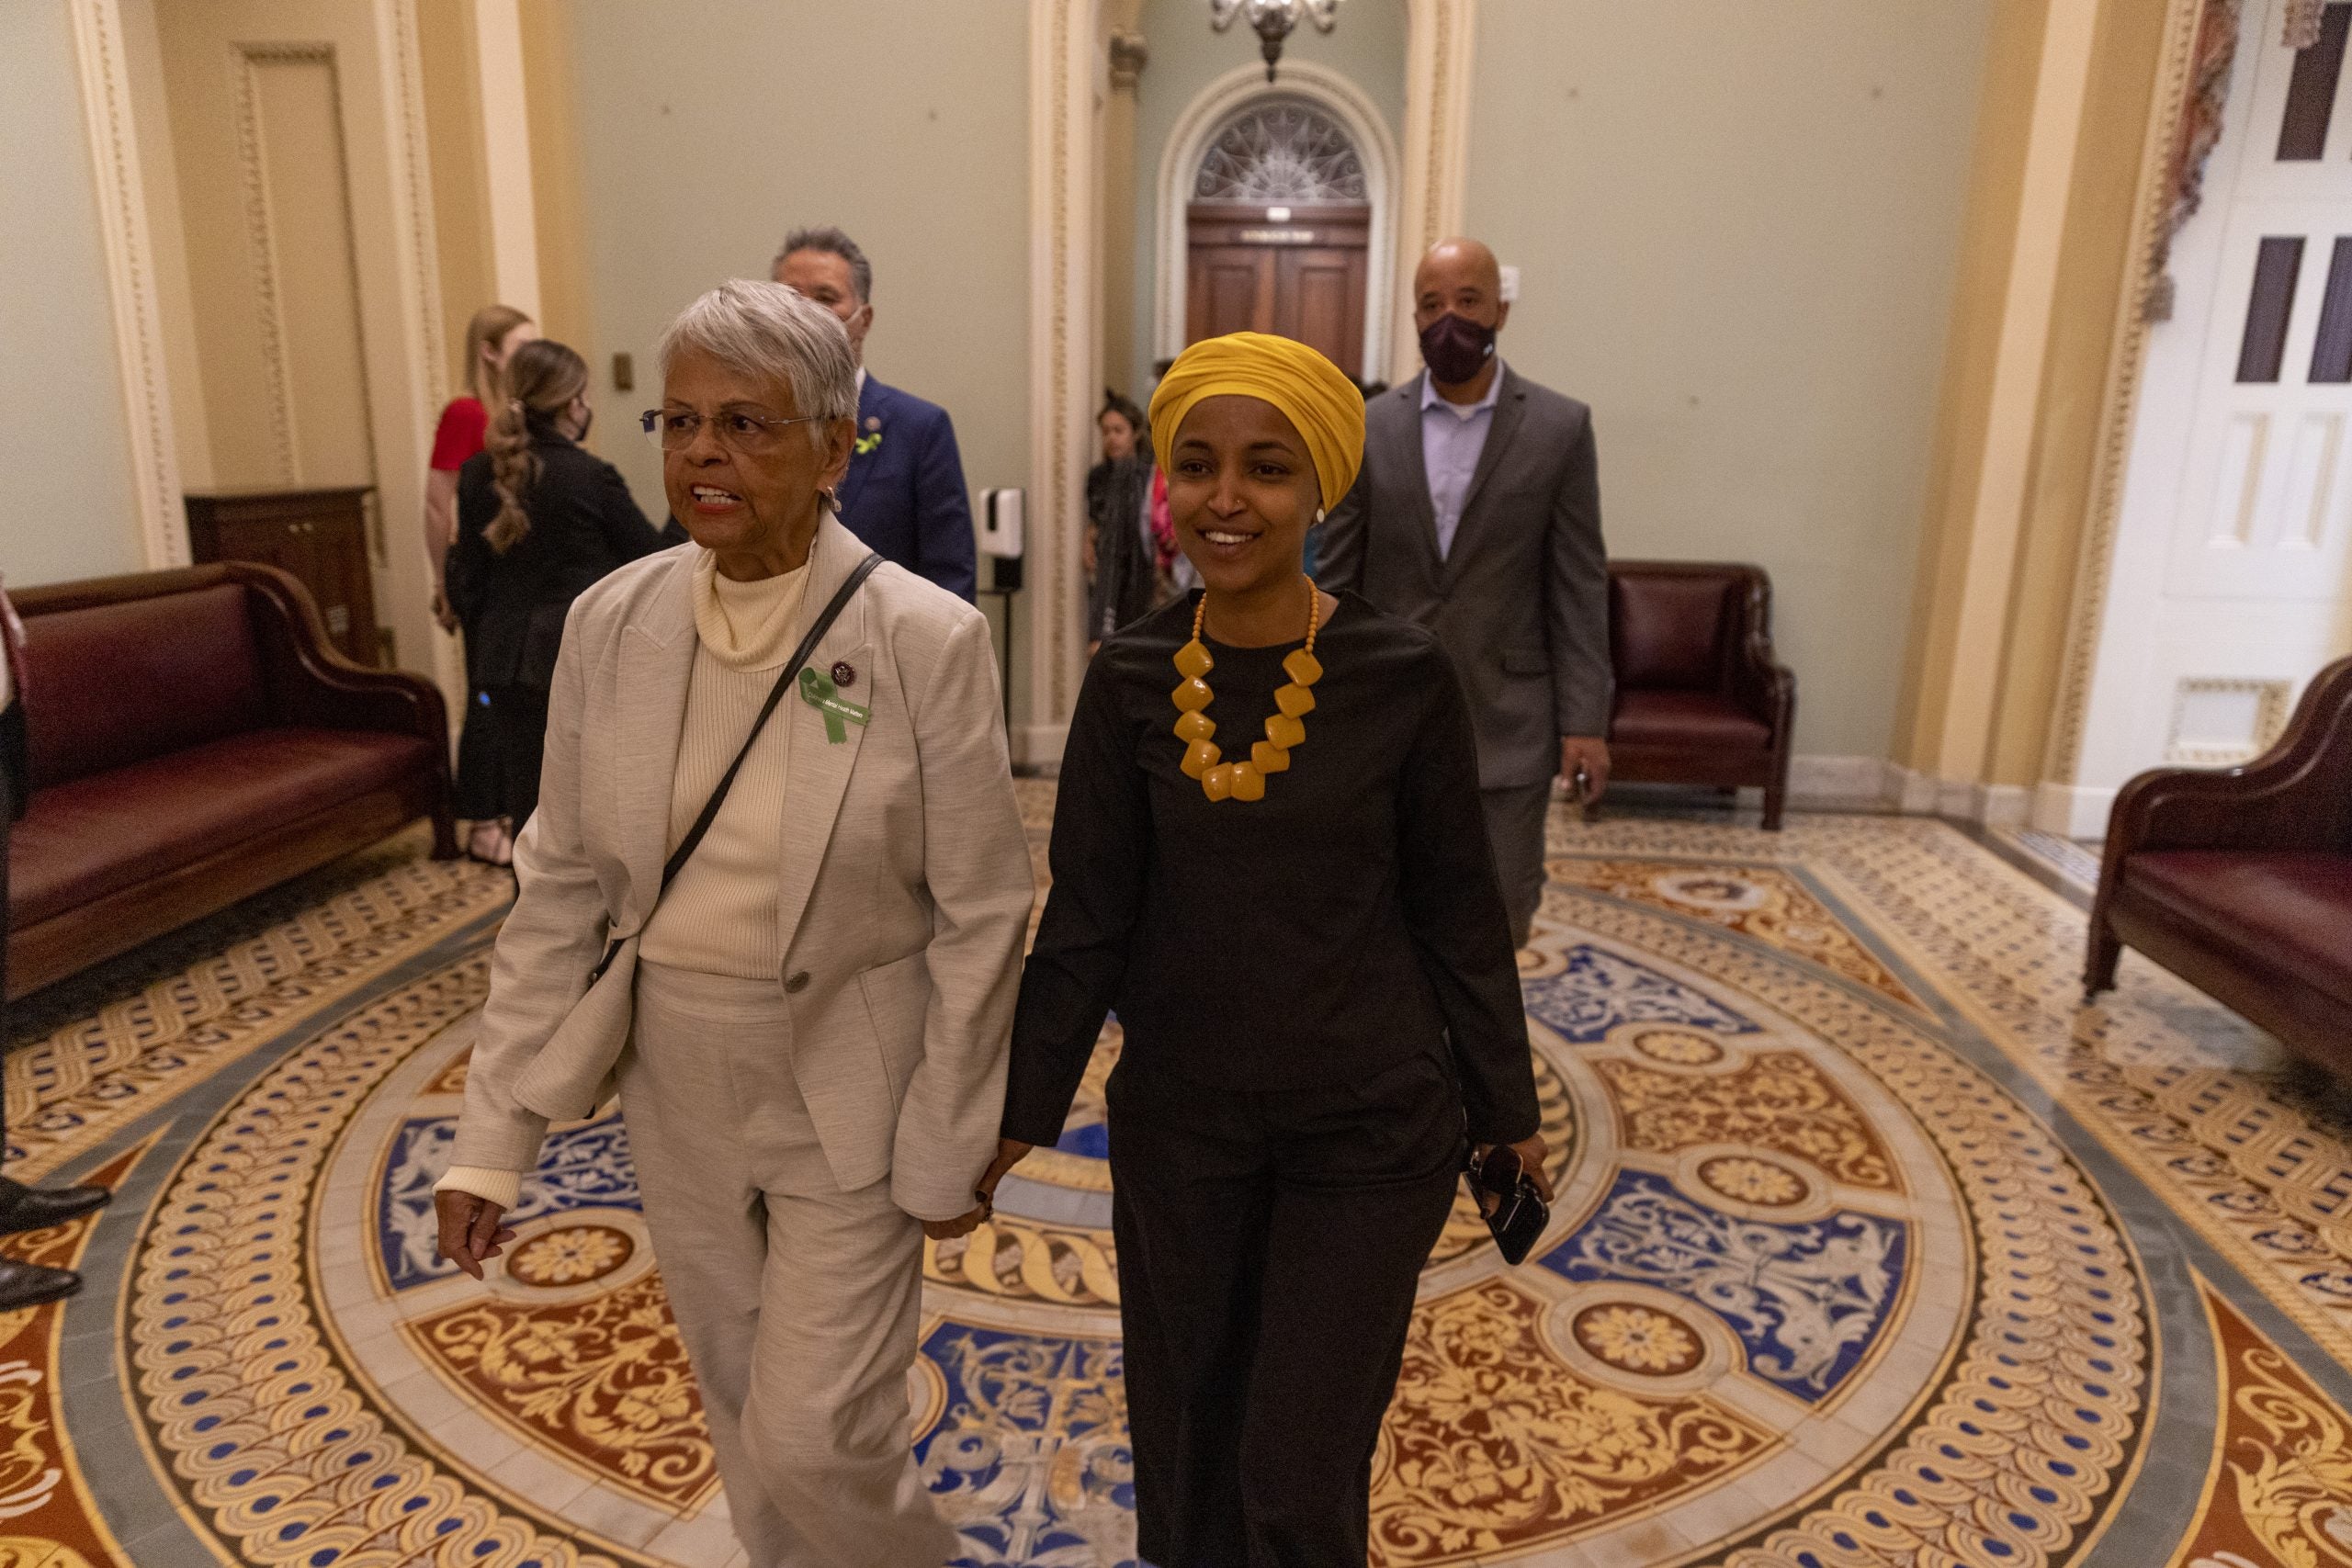 U.S. Rep Ilhan Omar Fighting To Establish National Office For Missing Black Women And Girls